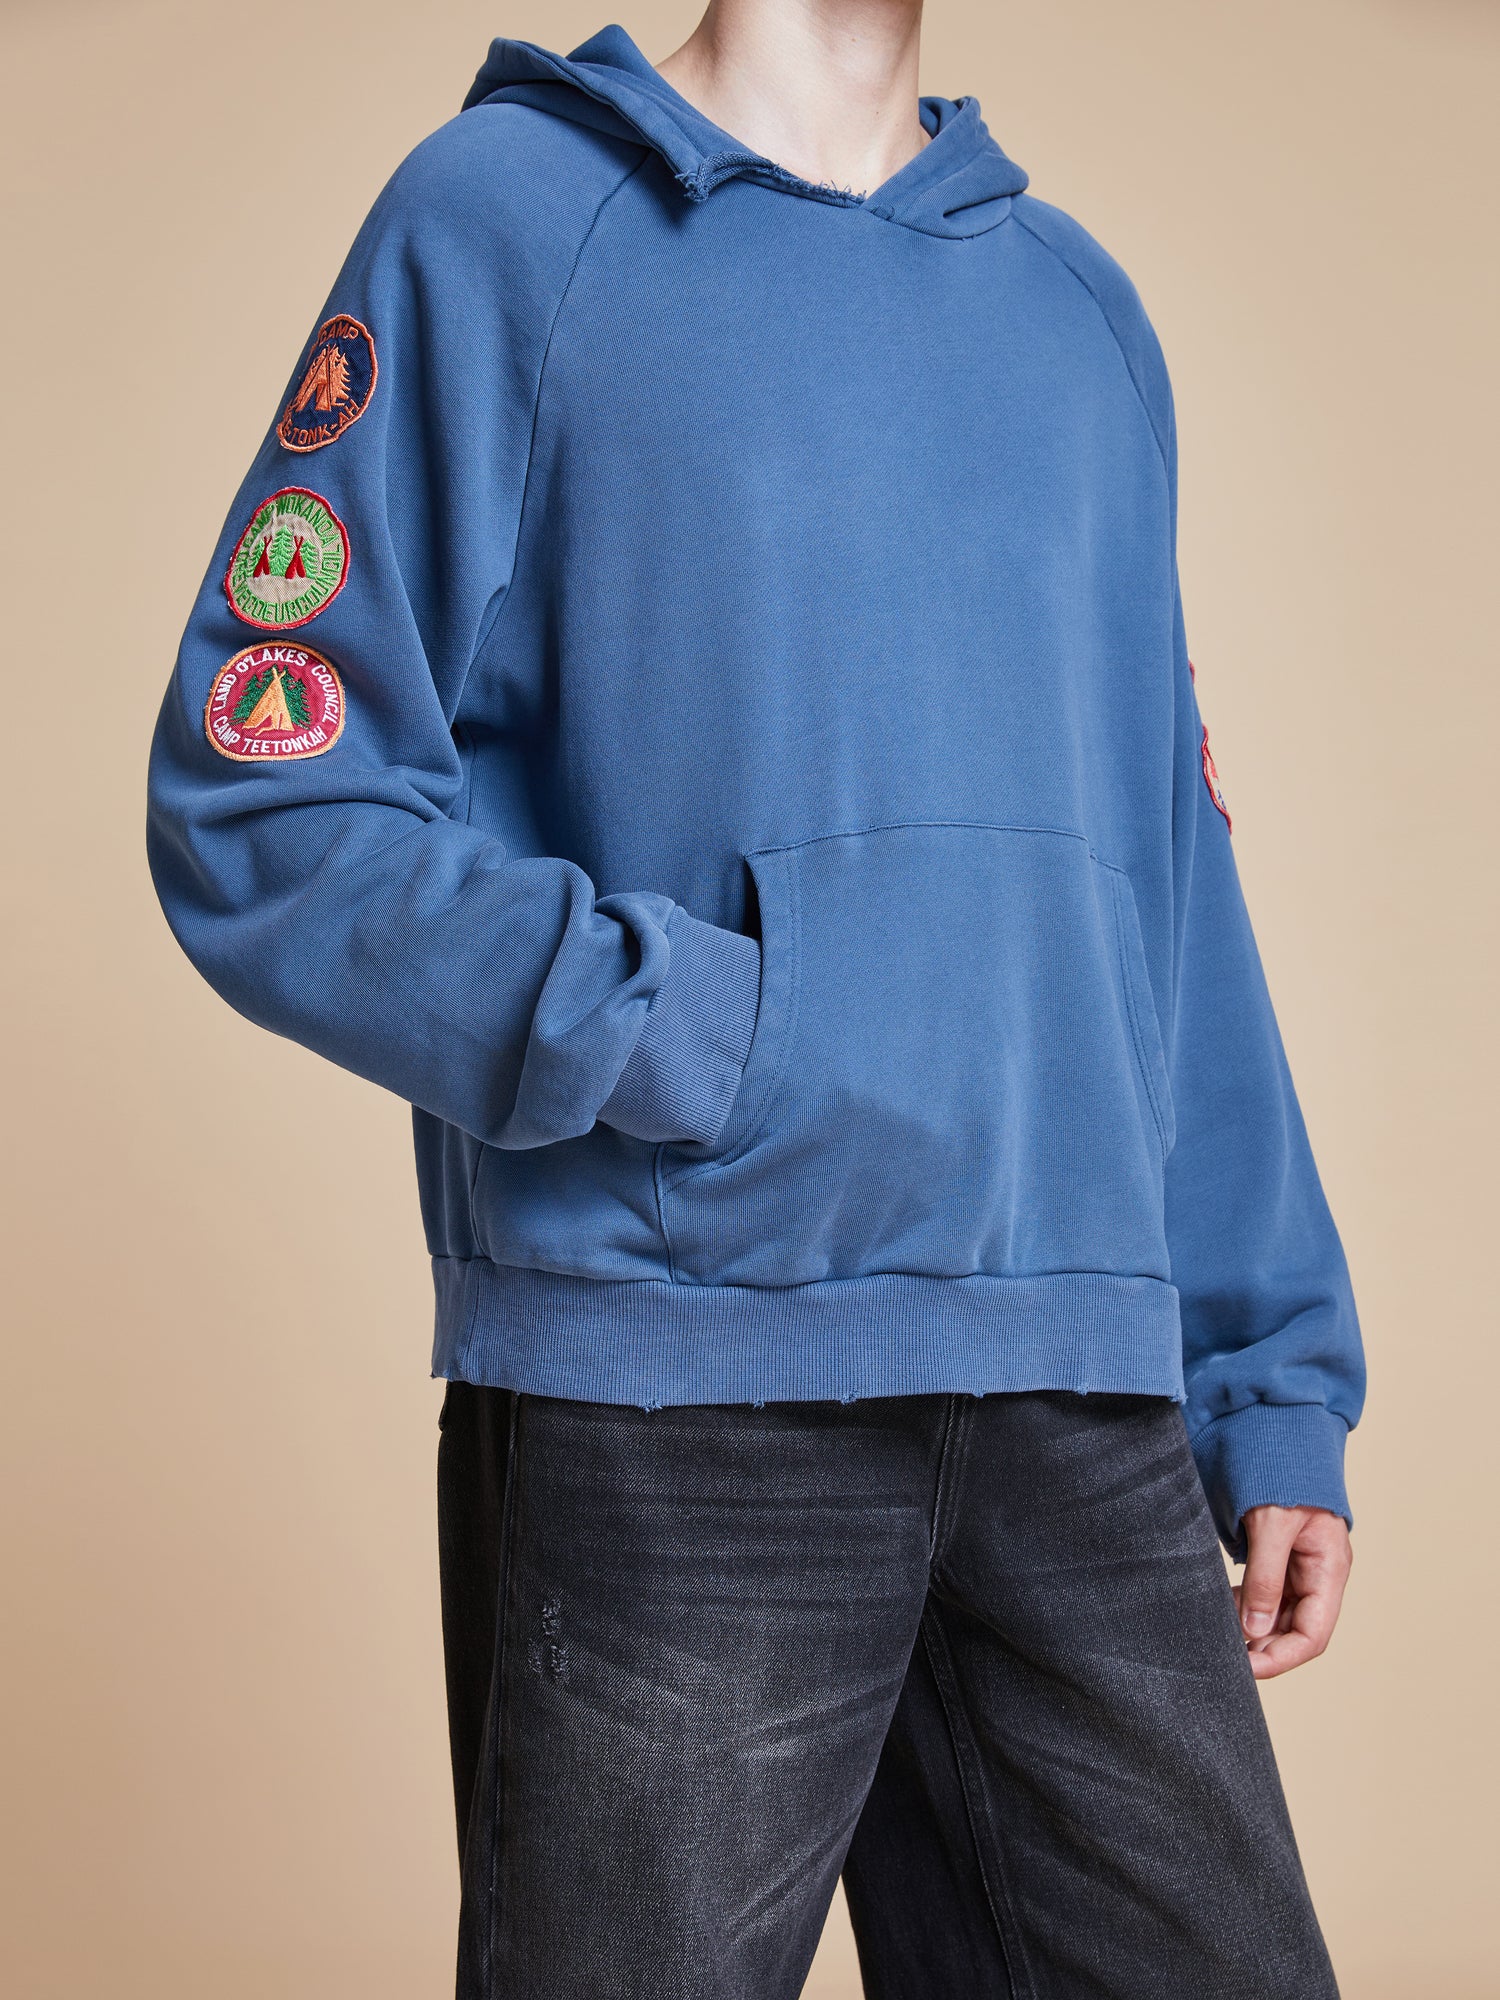 A man wearing a Found Timber Campground Hoodie with patches on it.